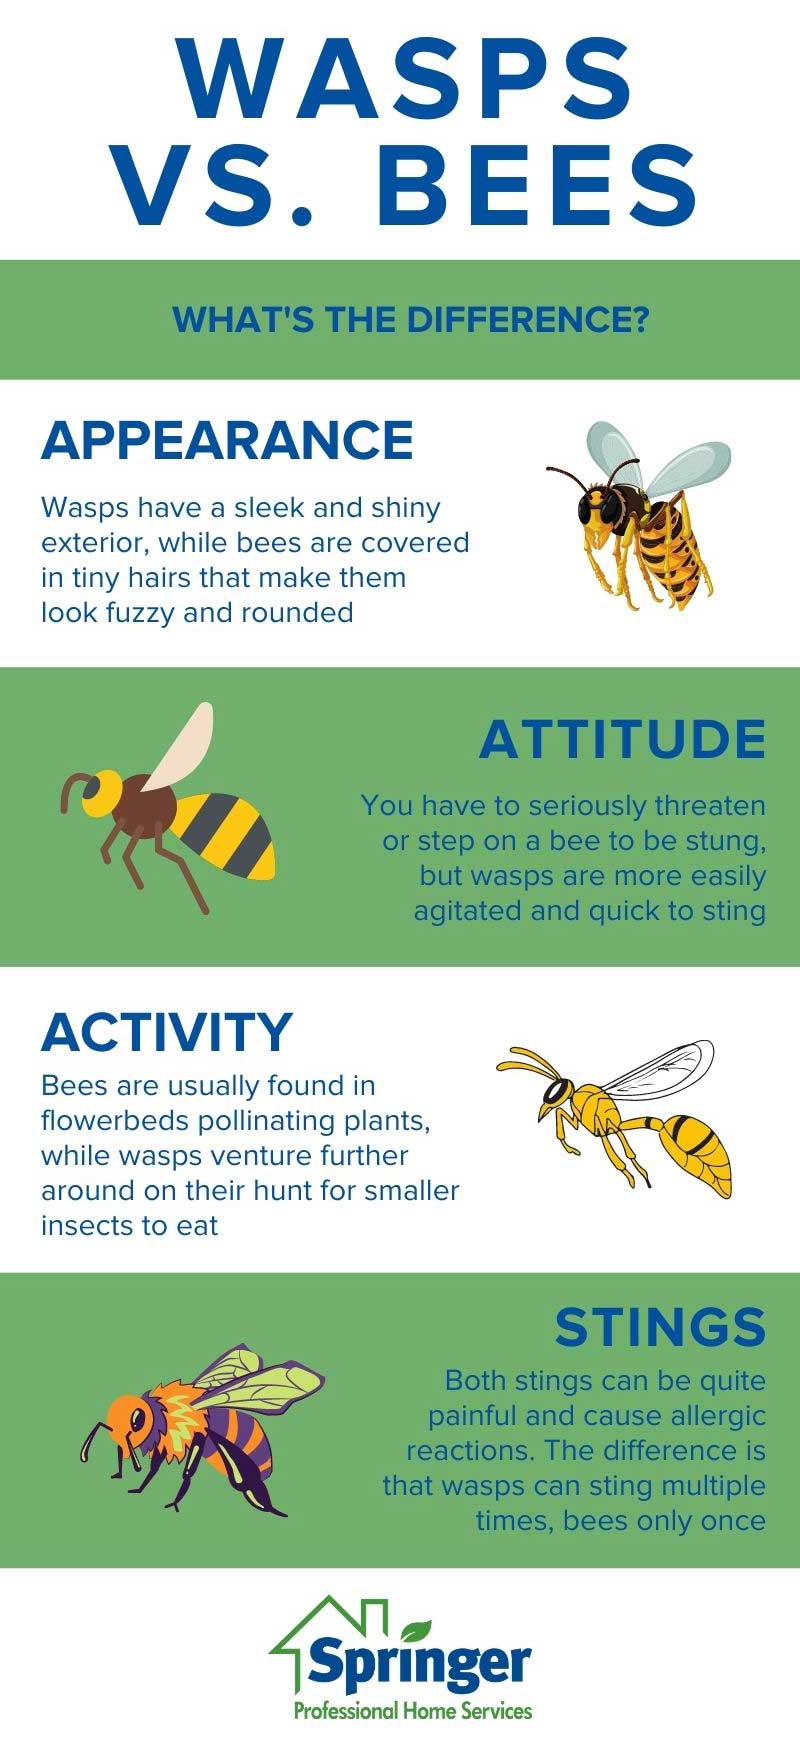 Differences between wasps and bees in Des Moines IA - Springer Professional Home Services